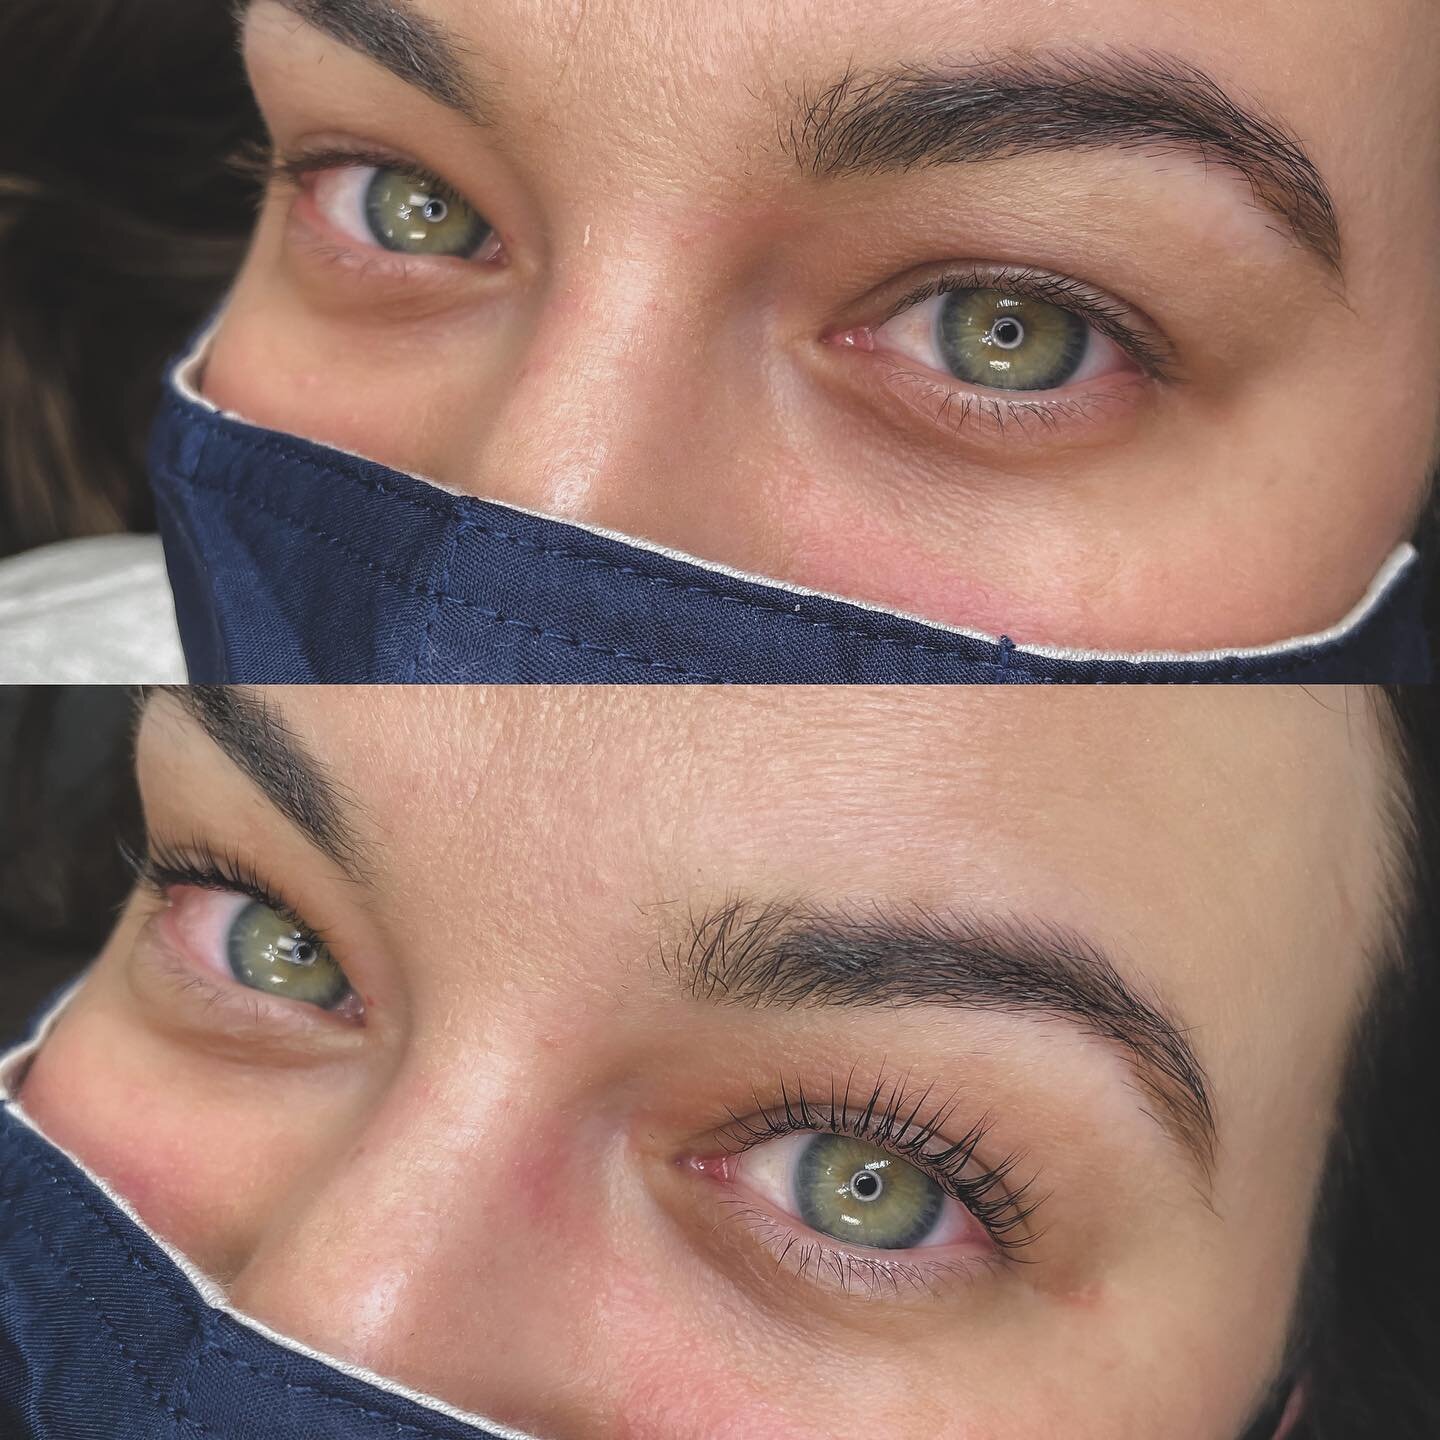 𝙆𝙚𝙧𝙖𝙩𝙞𝙣 𝙇𝙖𝙨𝙝 𝙇𝙞𝙛𝙩 &amp; 𝙏𝙞𝙣𝙩
Perfect for anyone who wants to give their lashes a little boost without all the maintenance. Results may vary. Lasts 8-10 weeks 
✨New clients receive $20 off first lash set|$10 off keratin|$5 off brow 